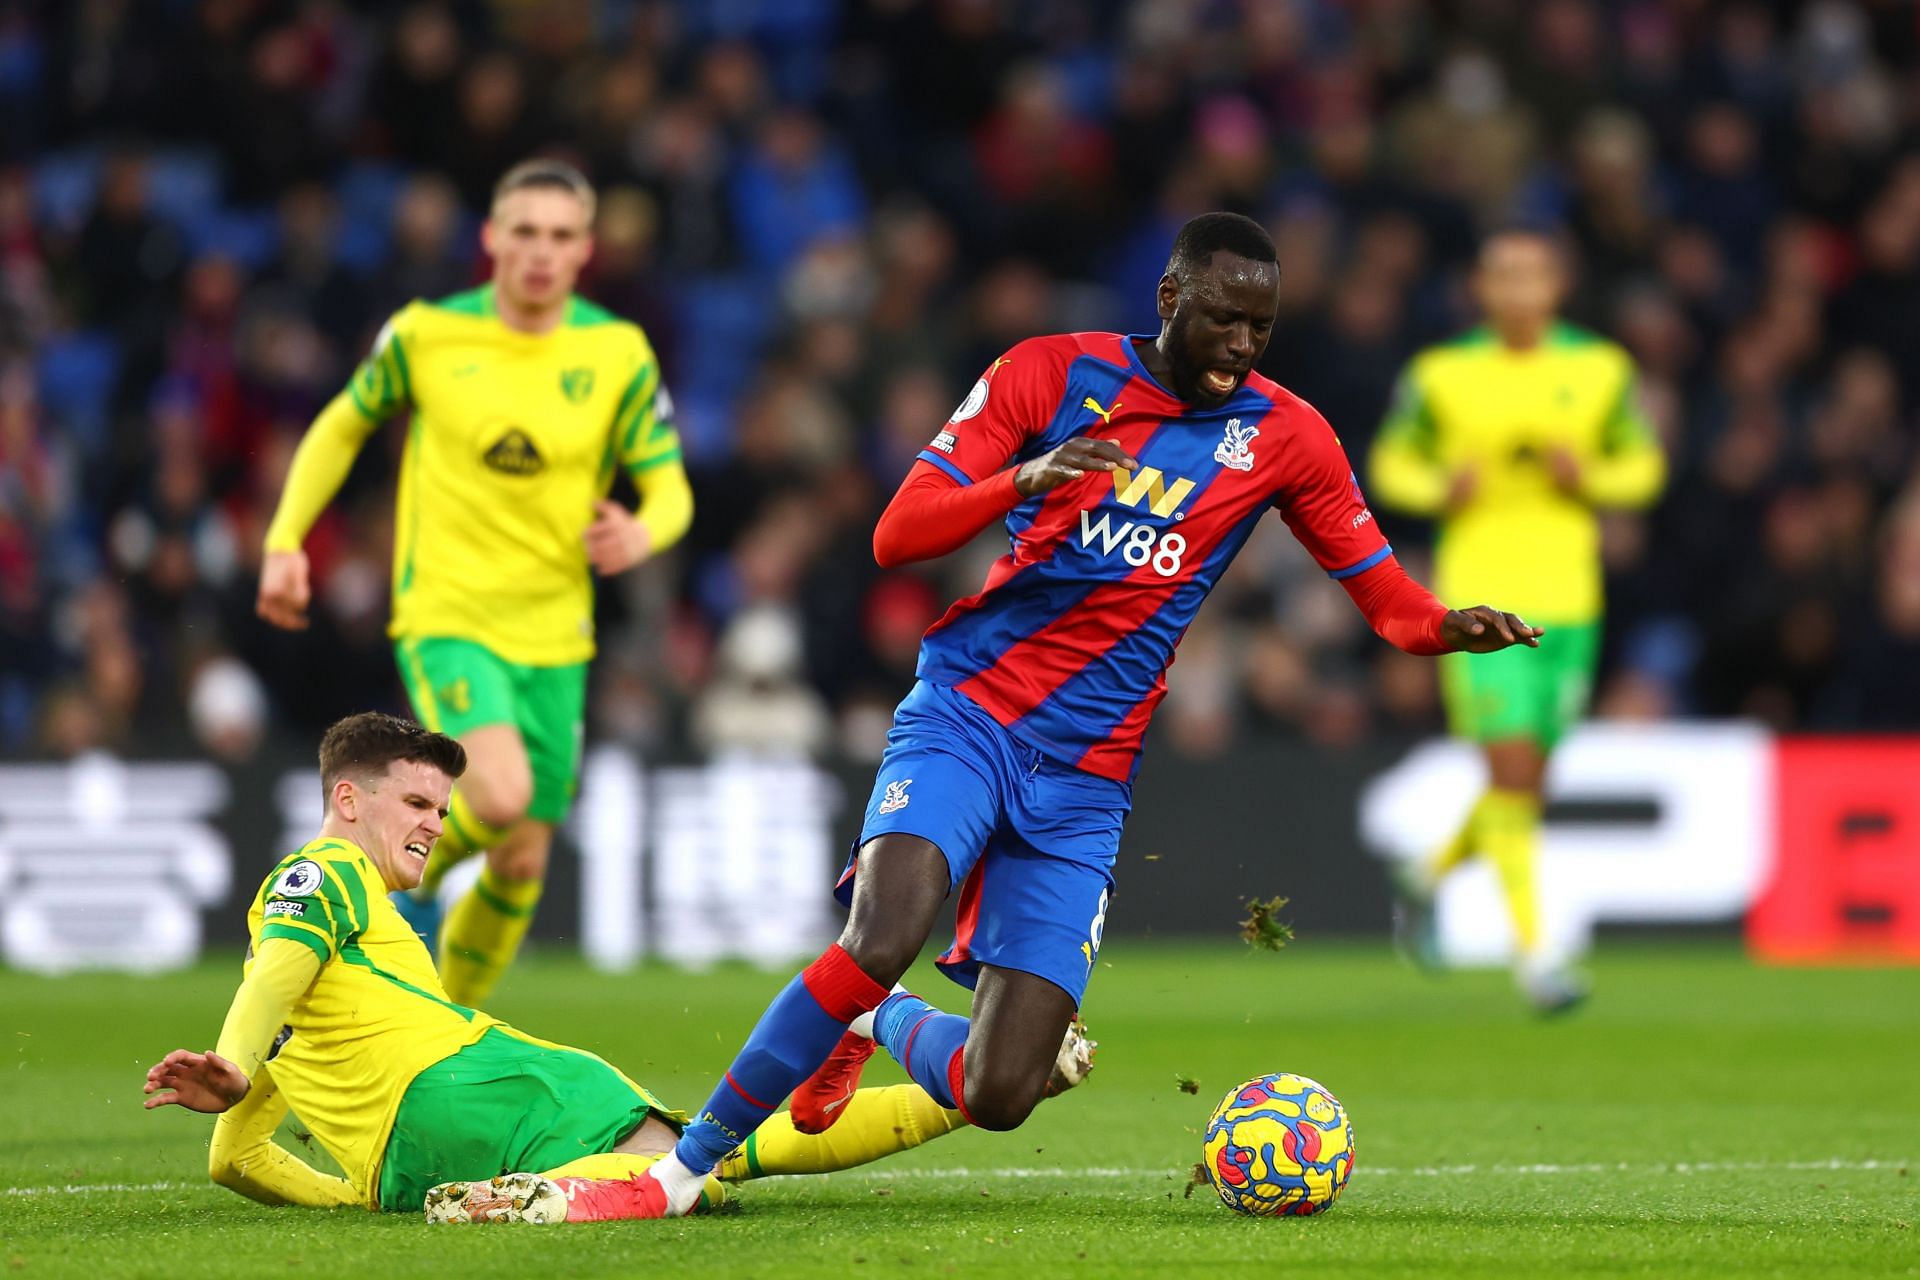 Kouyate will be a huge miss for Palace